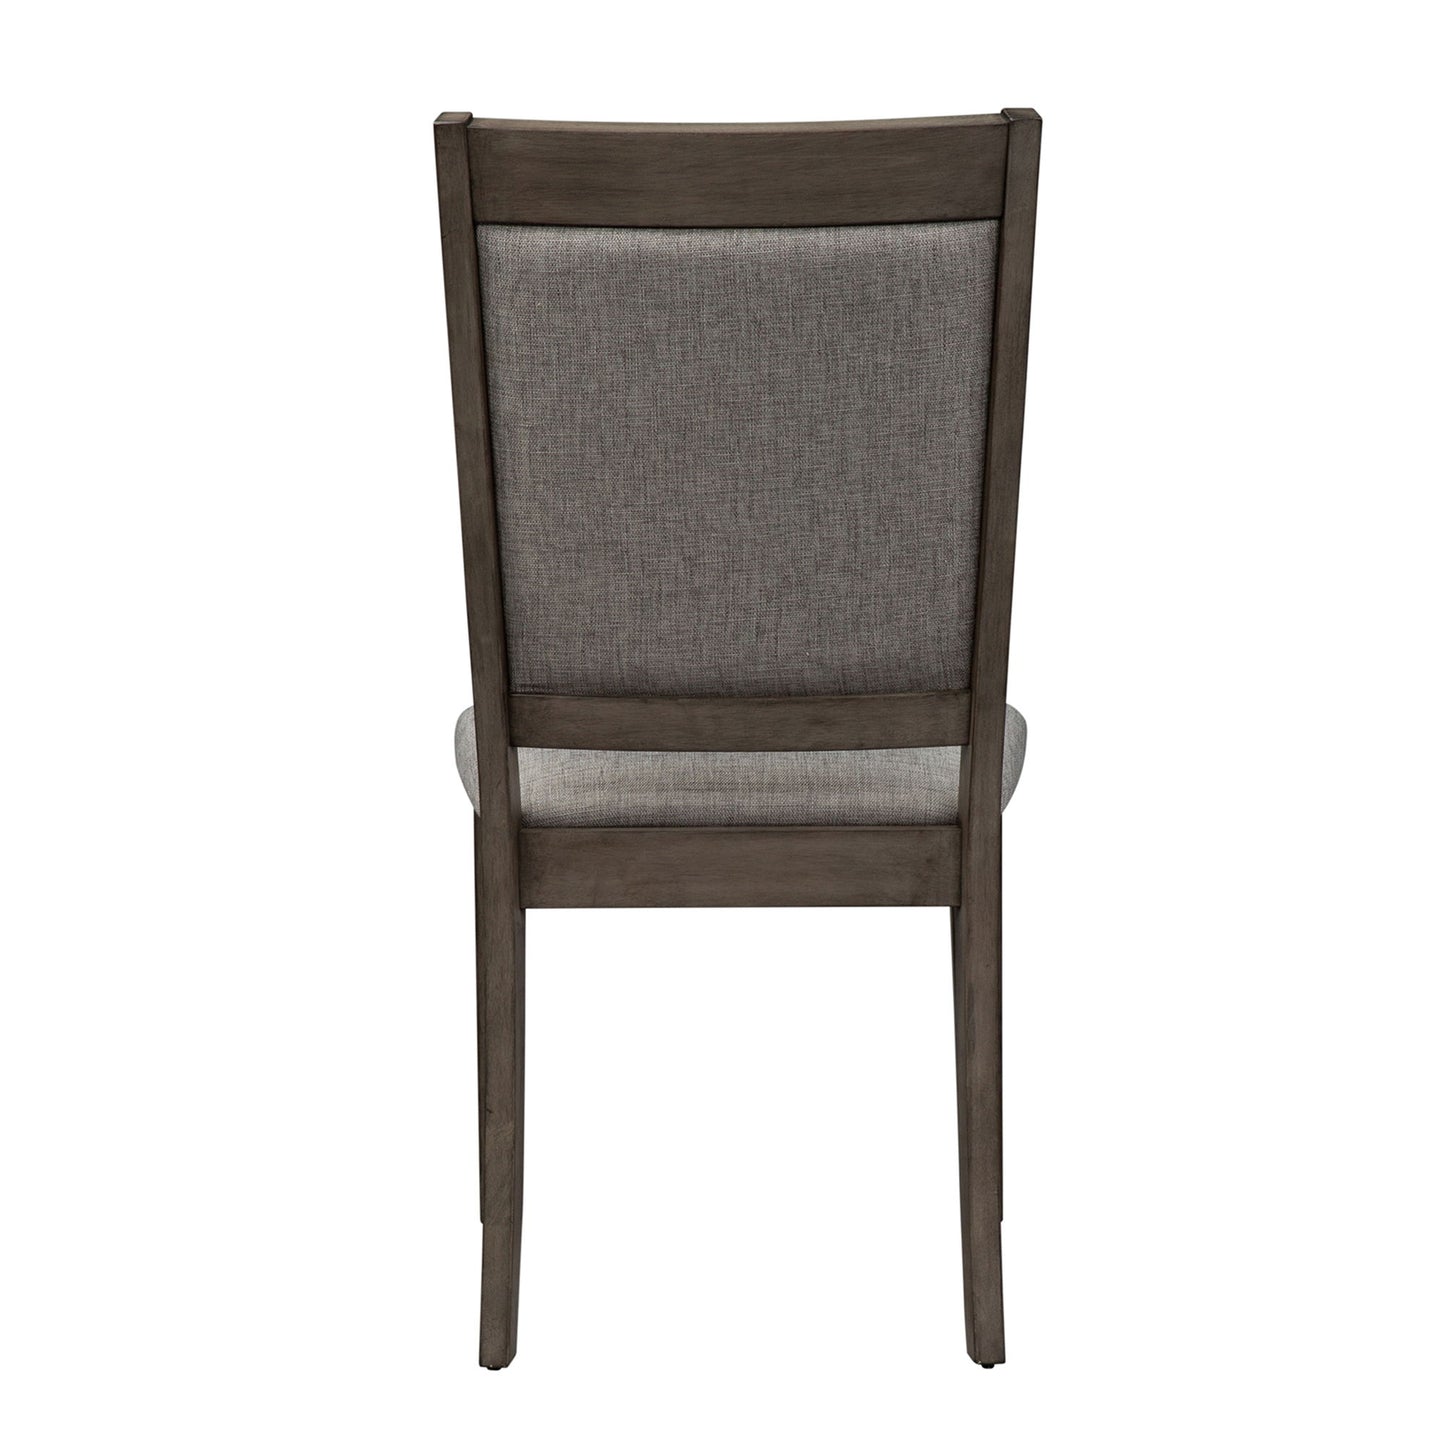 Tanners Creek - Upholstered Side Chair - Dark Gray